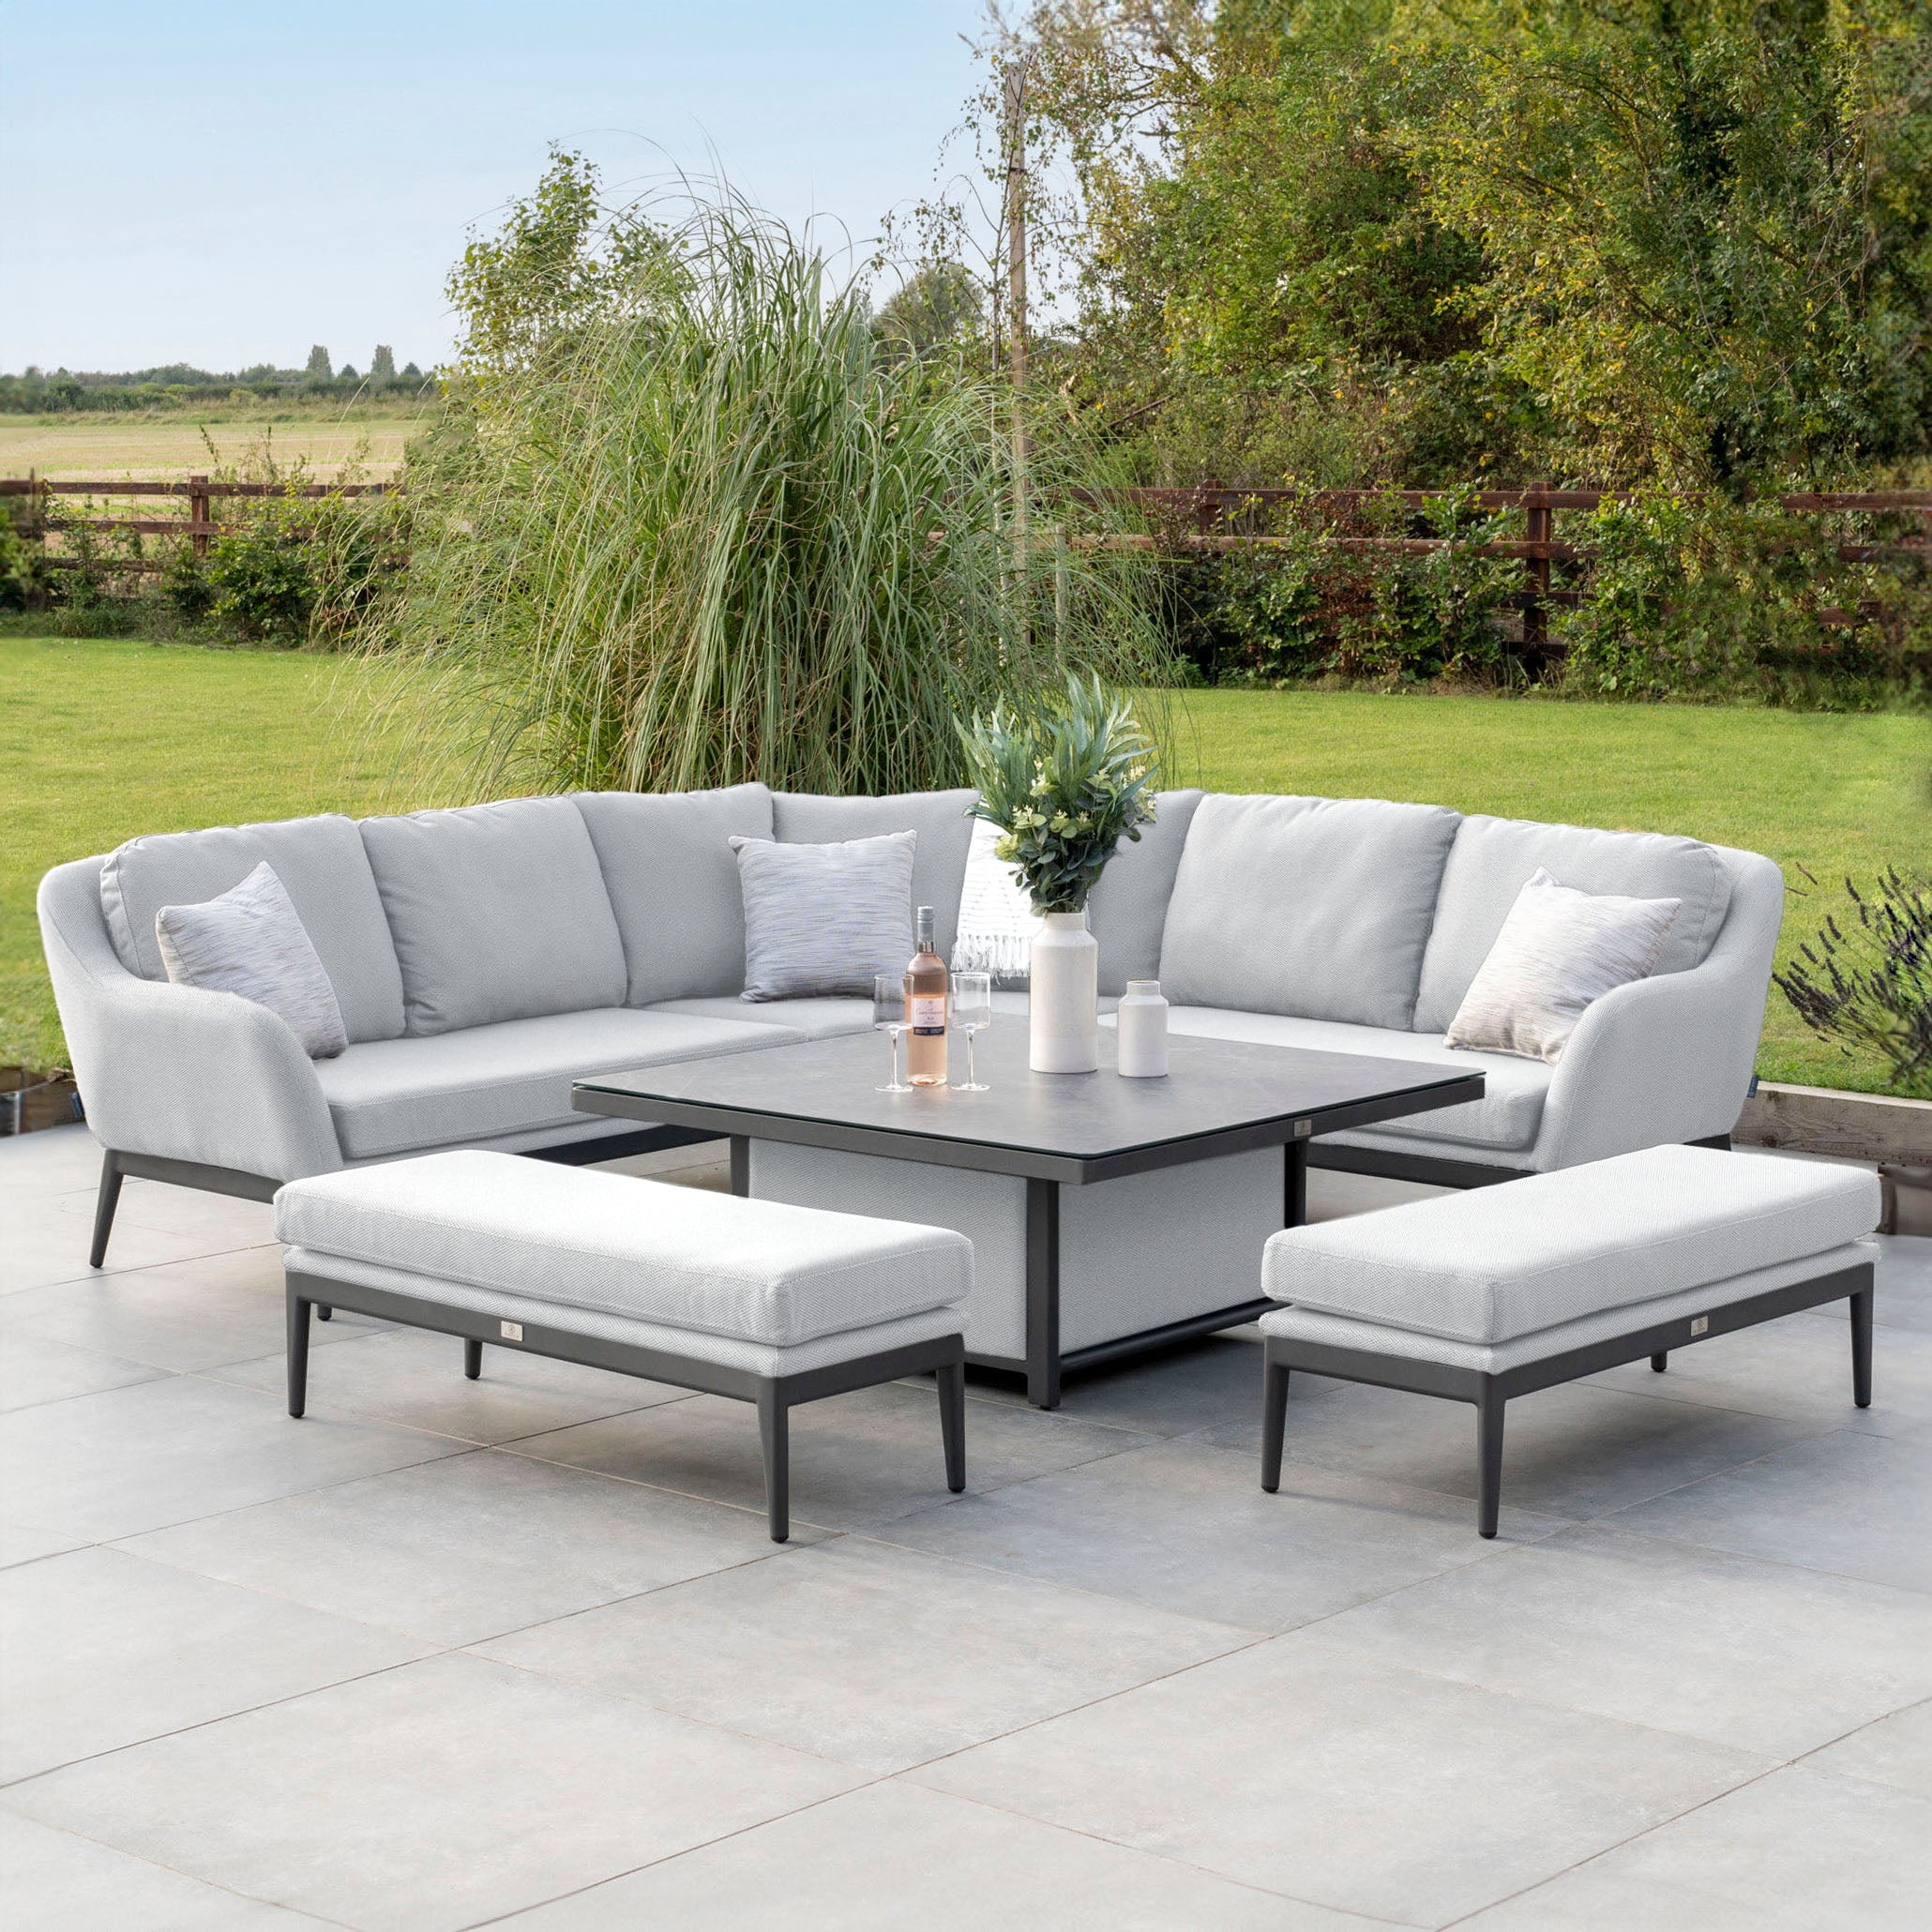 Luna Deluxe Outdoor Fabric Square Corner Dining Set with Rising Table in Oyster Grey